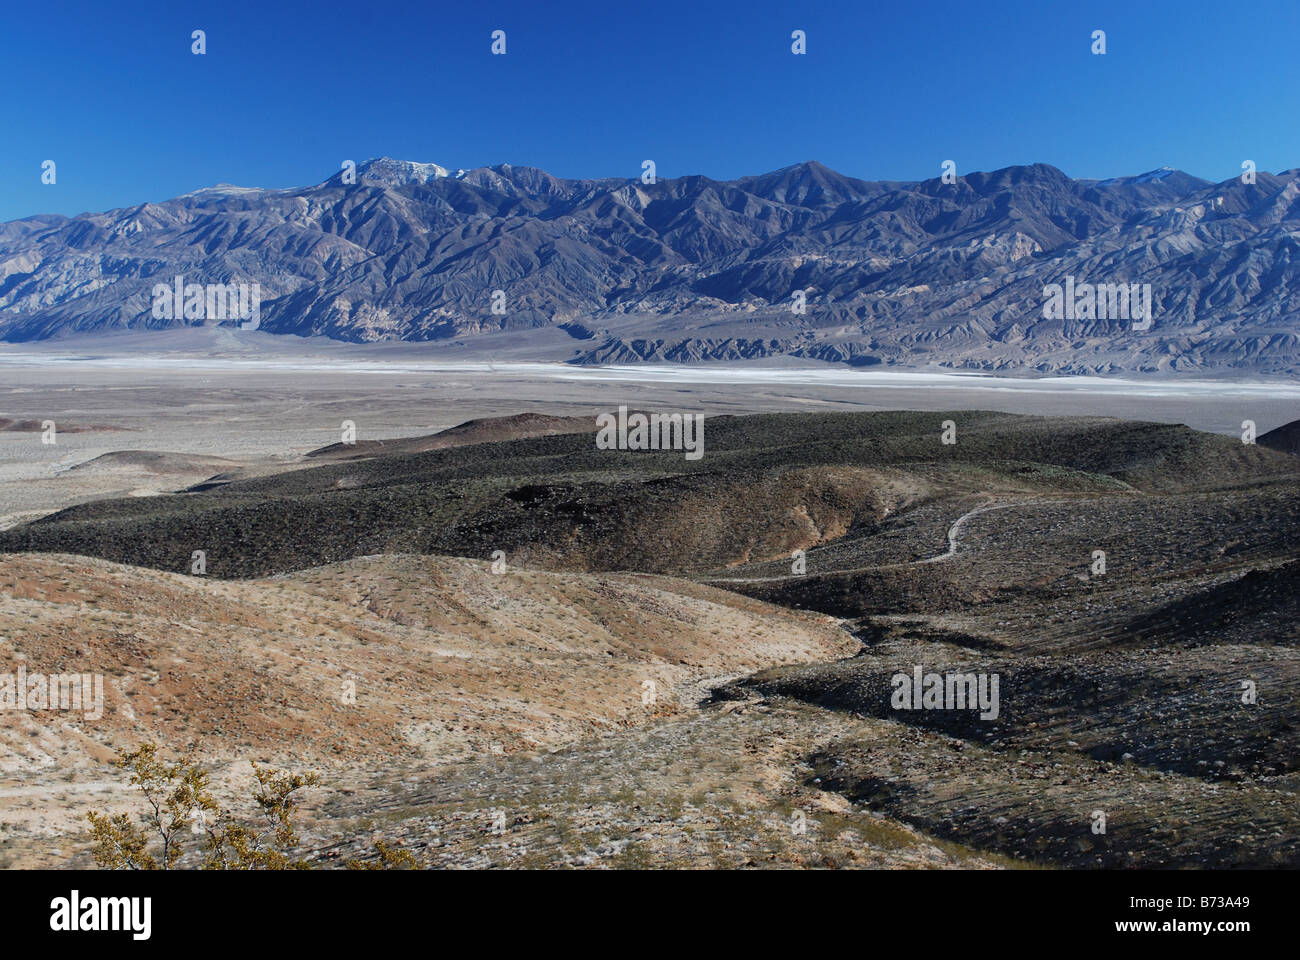 Telescope Peak and the Panamint Mountains in Death Valley National Park CA USA Stock Photo